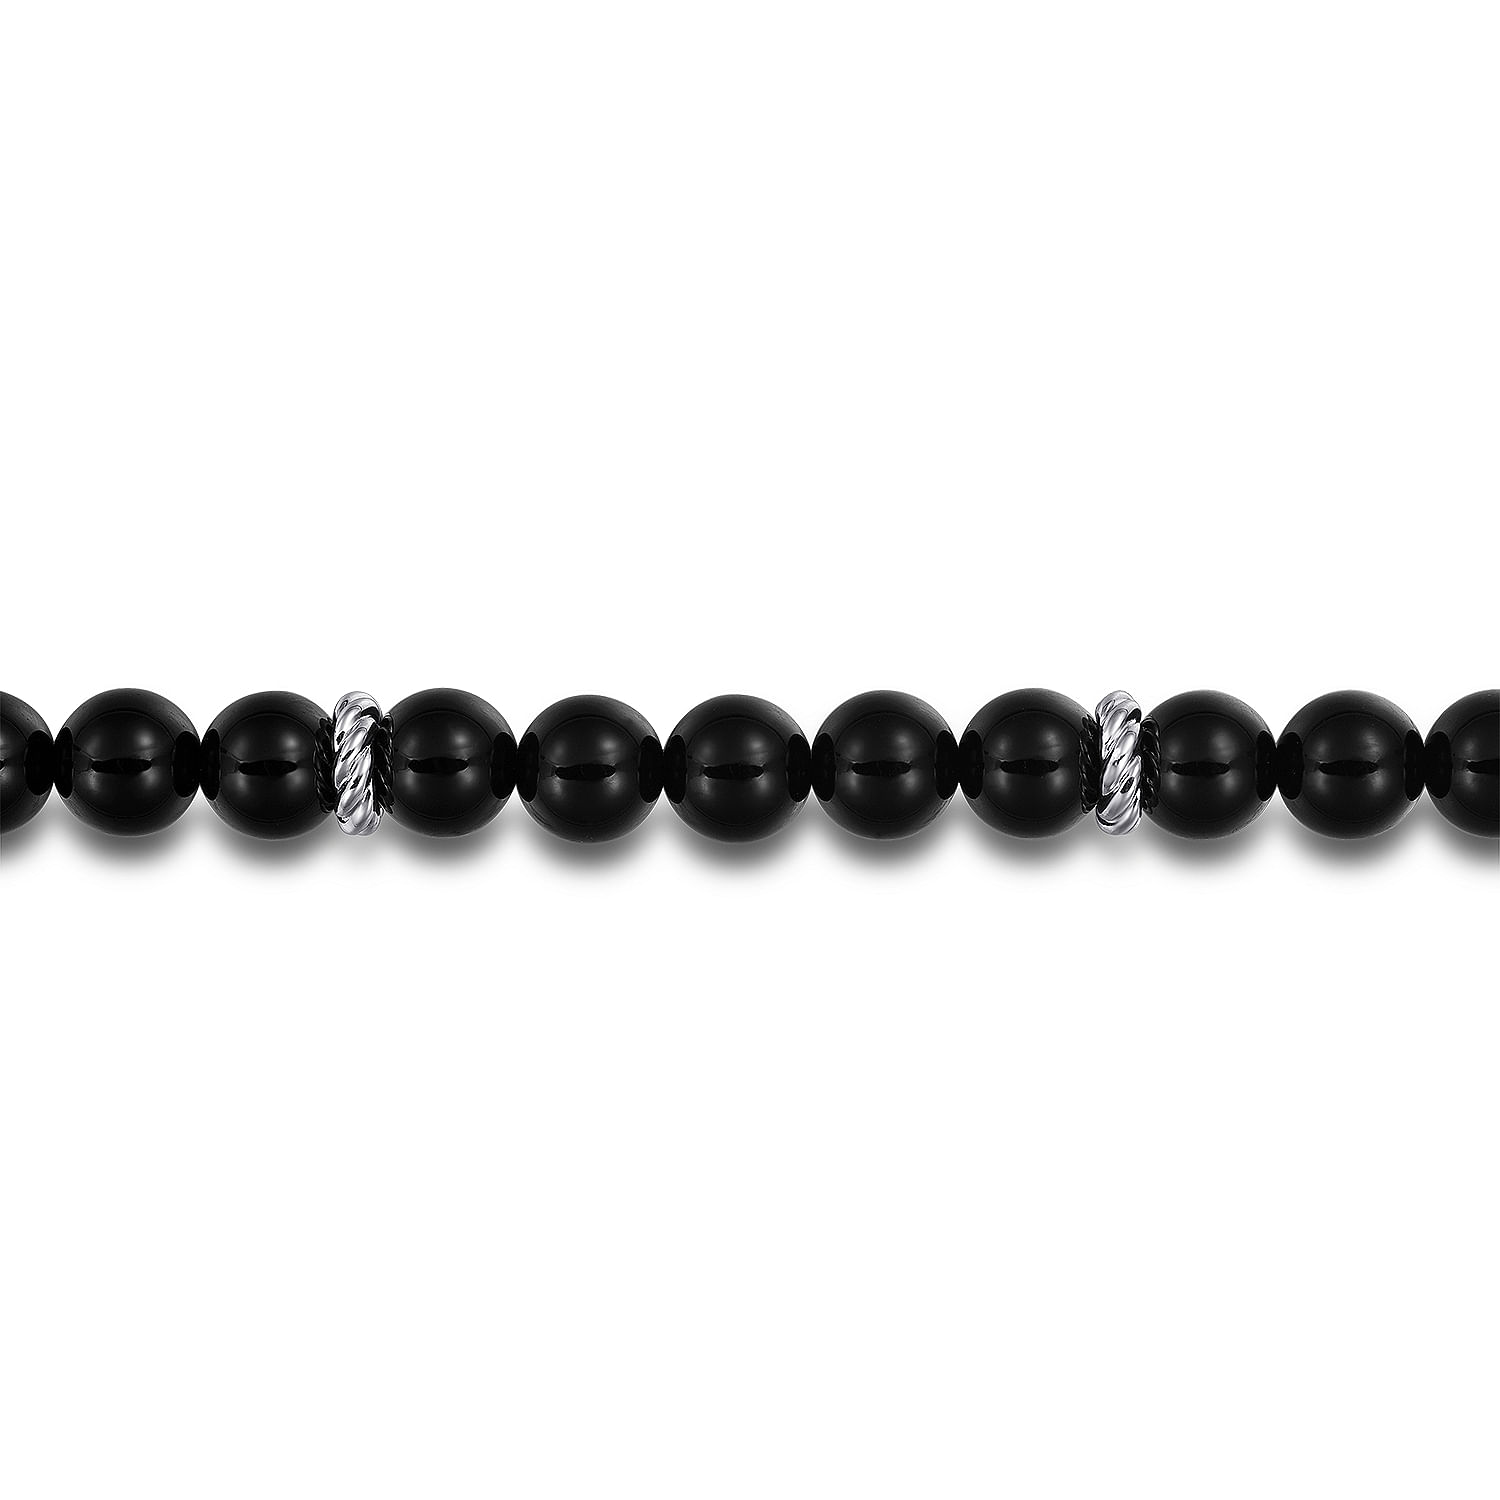 Sterling Silver and 8mm Onyx Beaded Bracelet